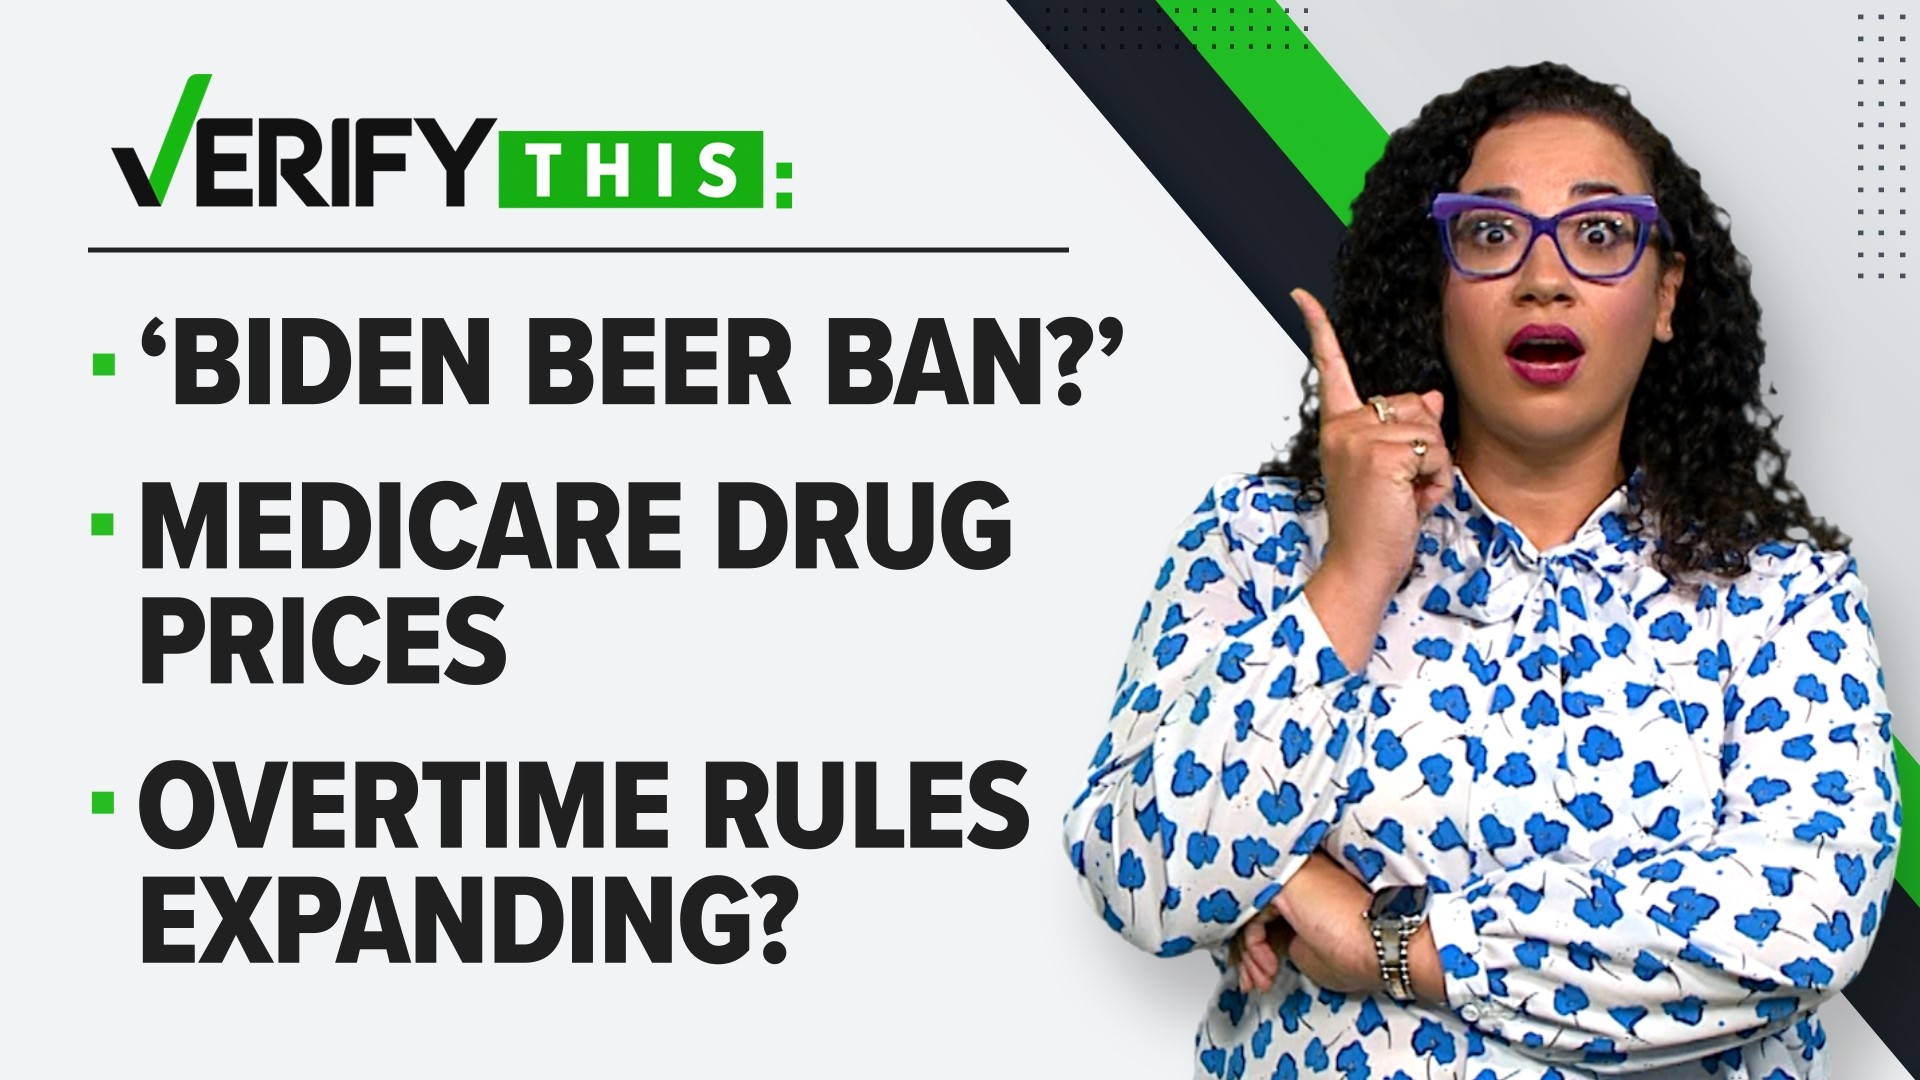 In this week's episode, we look into SAVE student loan plan, VERIFY if seniors could see lower medication costs and if the White House will limit beer consumption